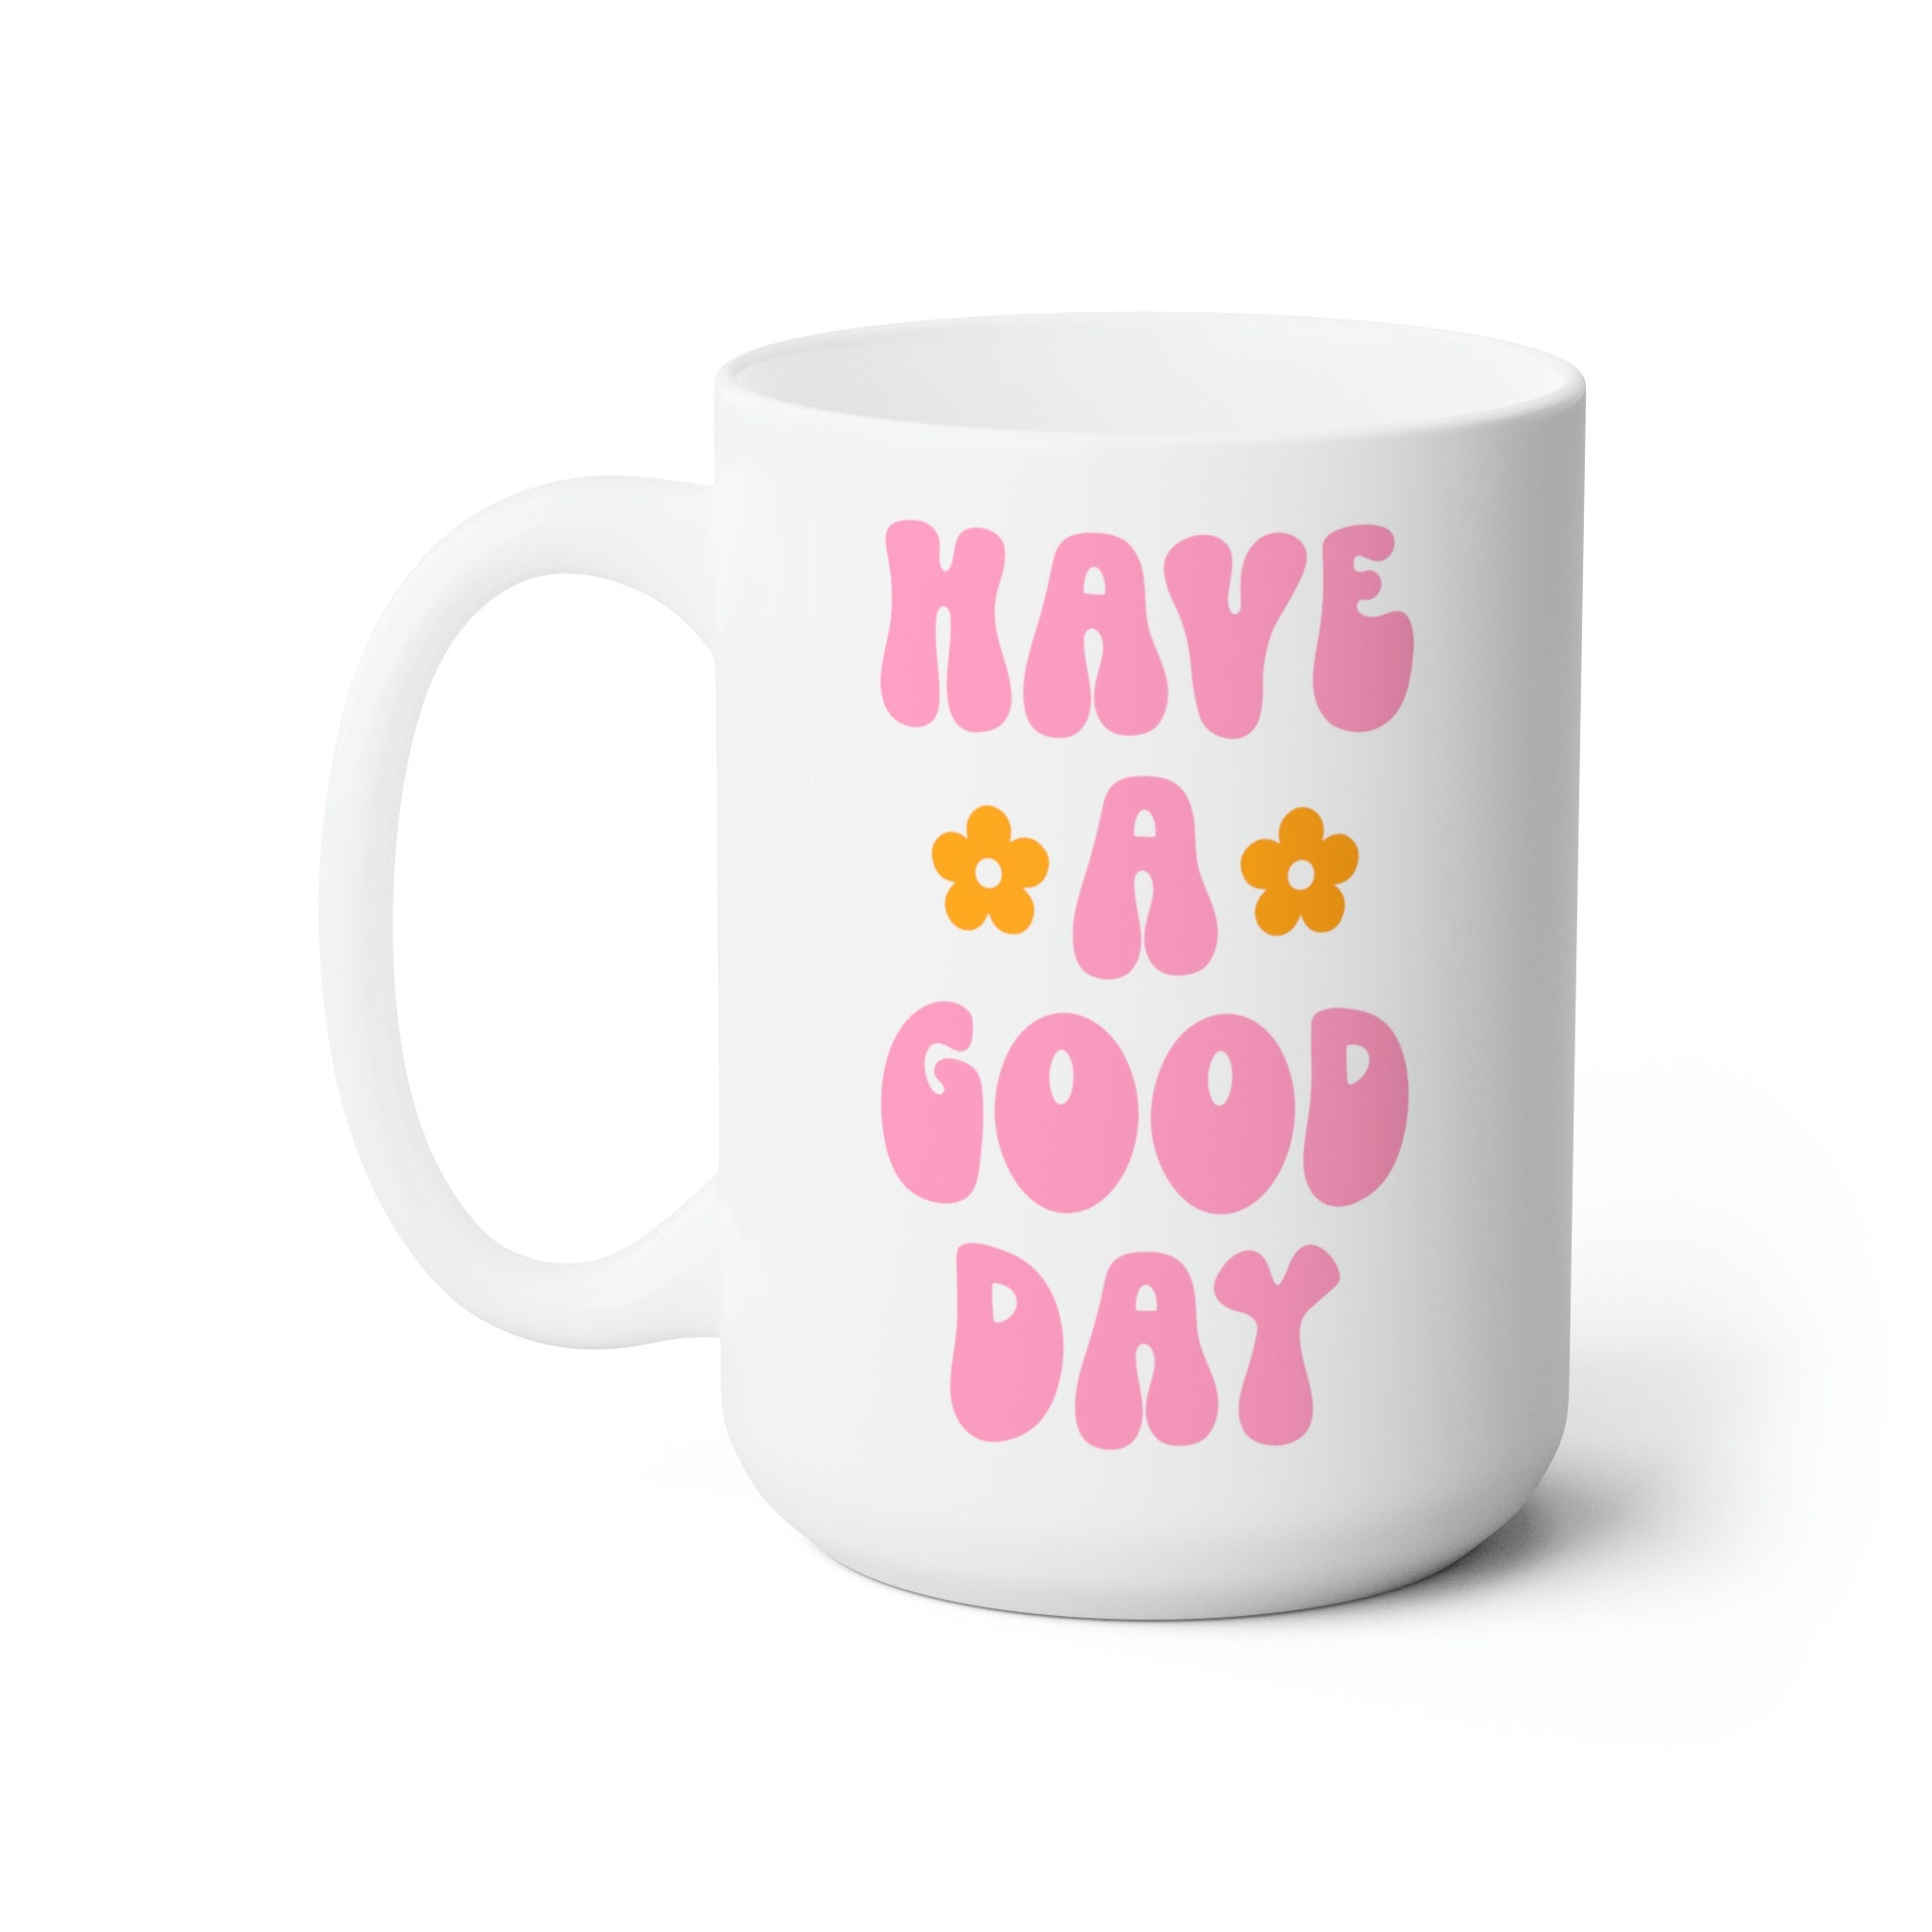  OGILRE Preppy Pink Inspirational Quotes It's A Good Day to Have  A Good Day Ceramic Double Side Printed Mug Cup, Preppy Have A Good Day  Coffee Milk Tea Mug Cup,Gifts For